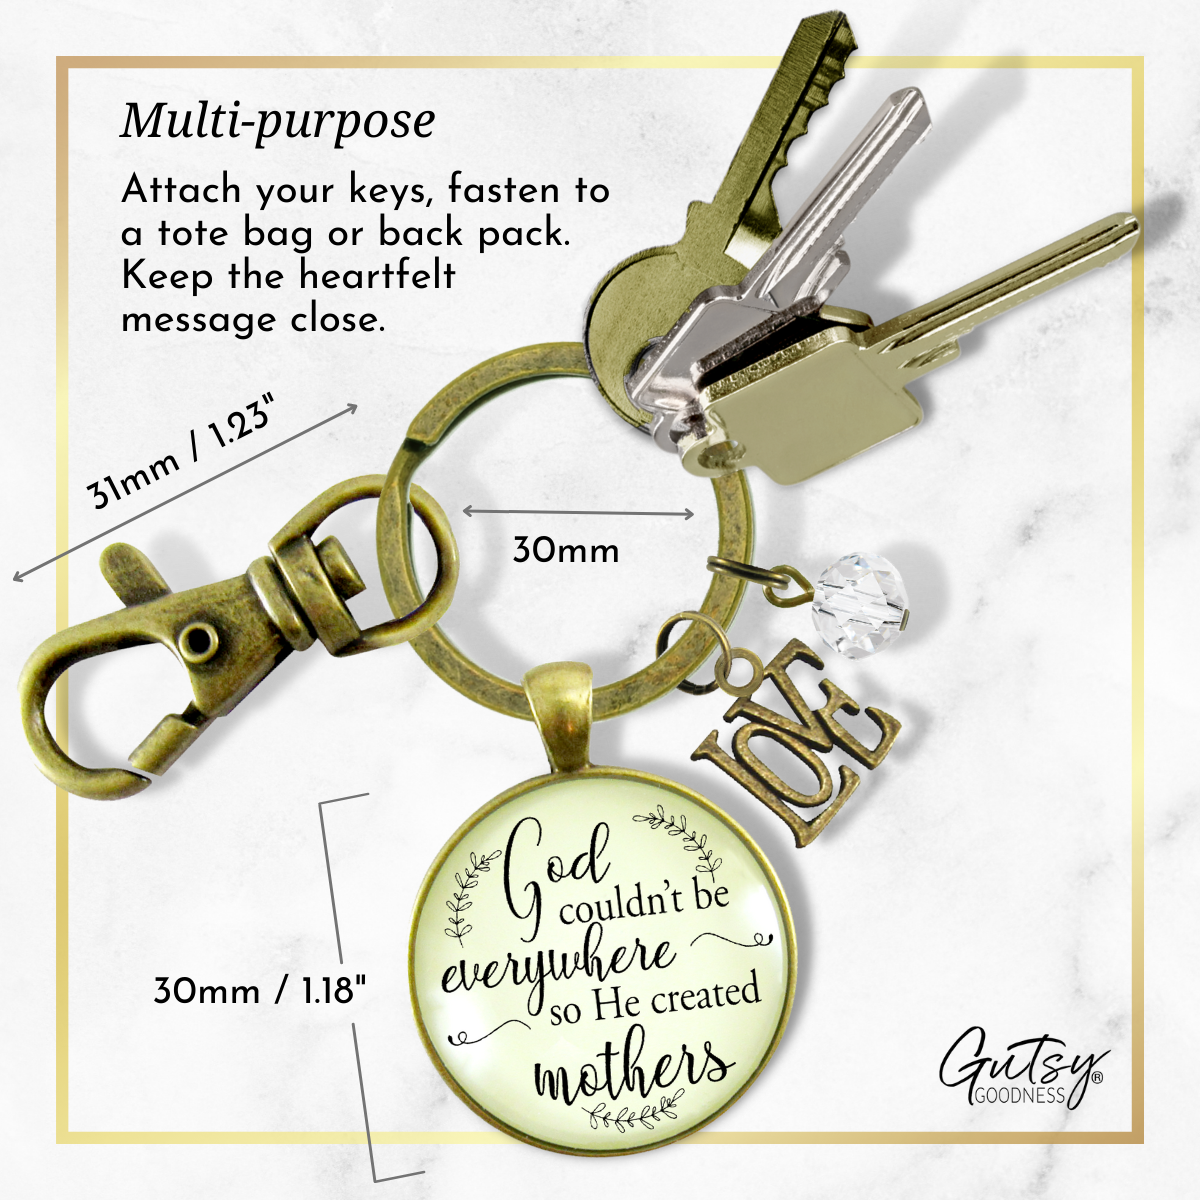 Blessed Mom Keychain Woman of Faith Motherhood Quote Family Love Charm - Gutsy Goodness;Blessed Mom Keychain Woman Of Faith Motherhood Quote Family Love Charm - Gutsy Goodness Handmade Jewelry Gifts